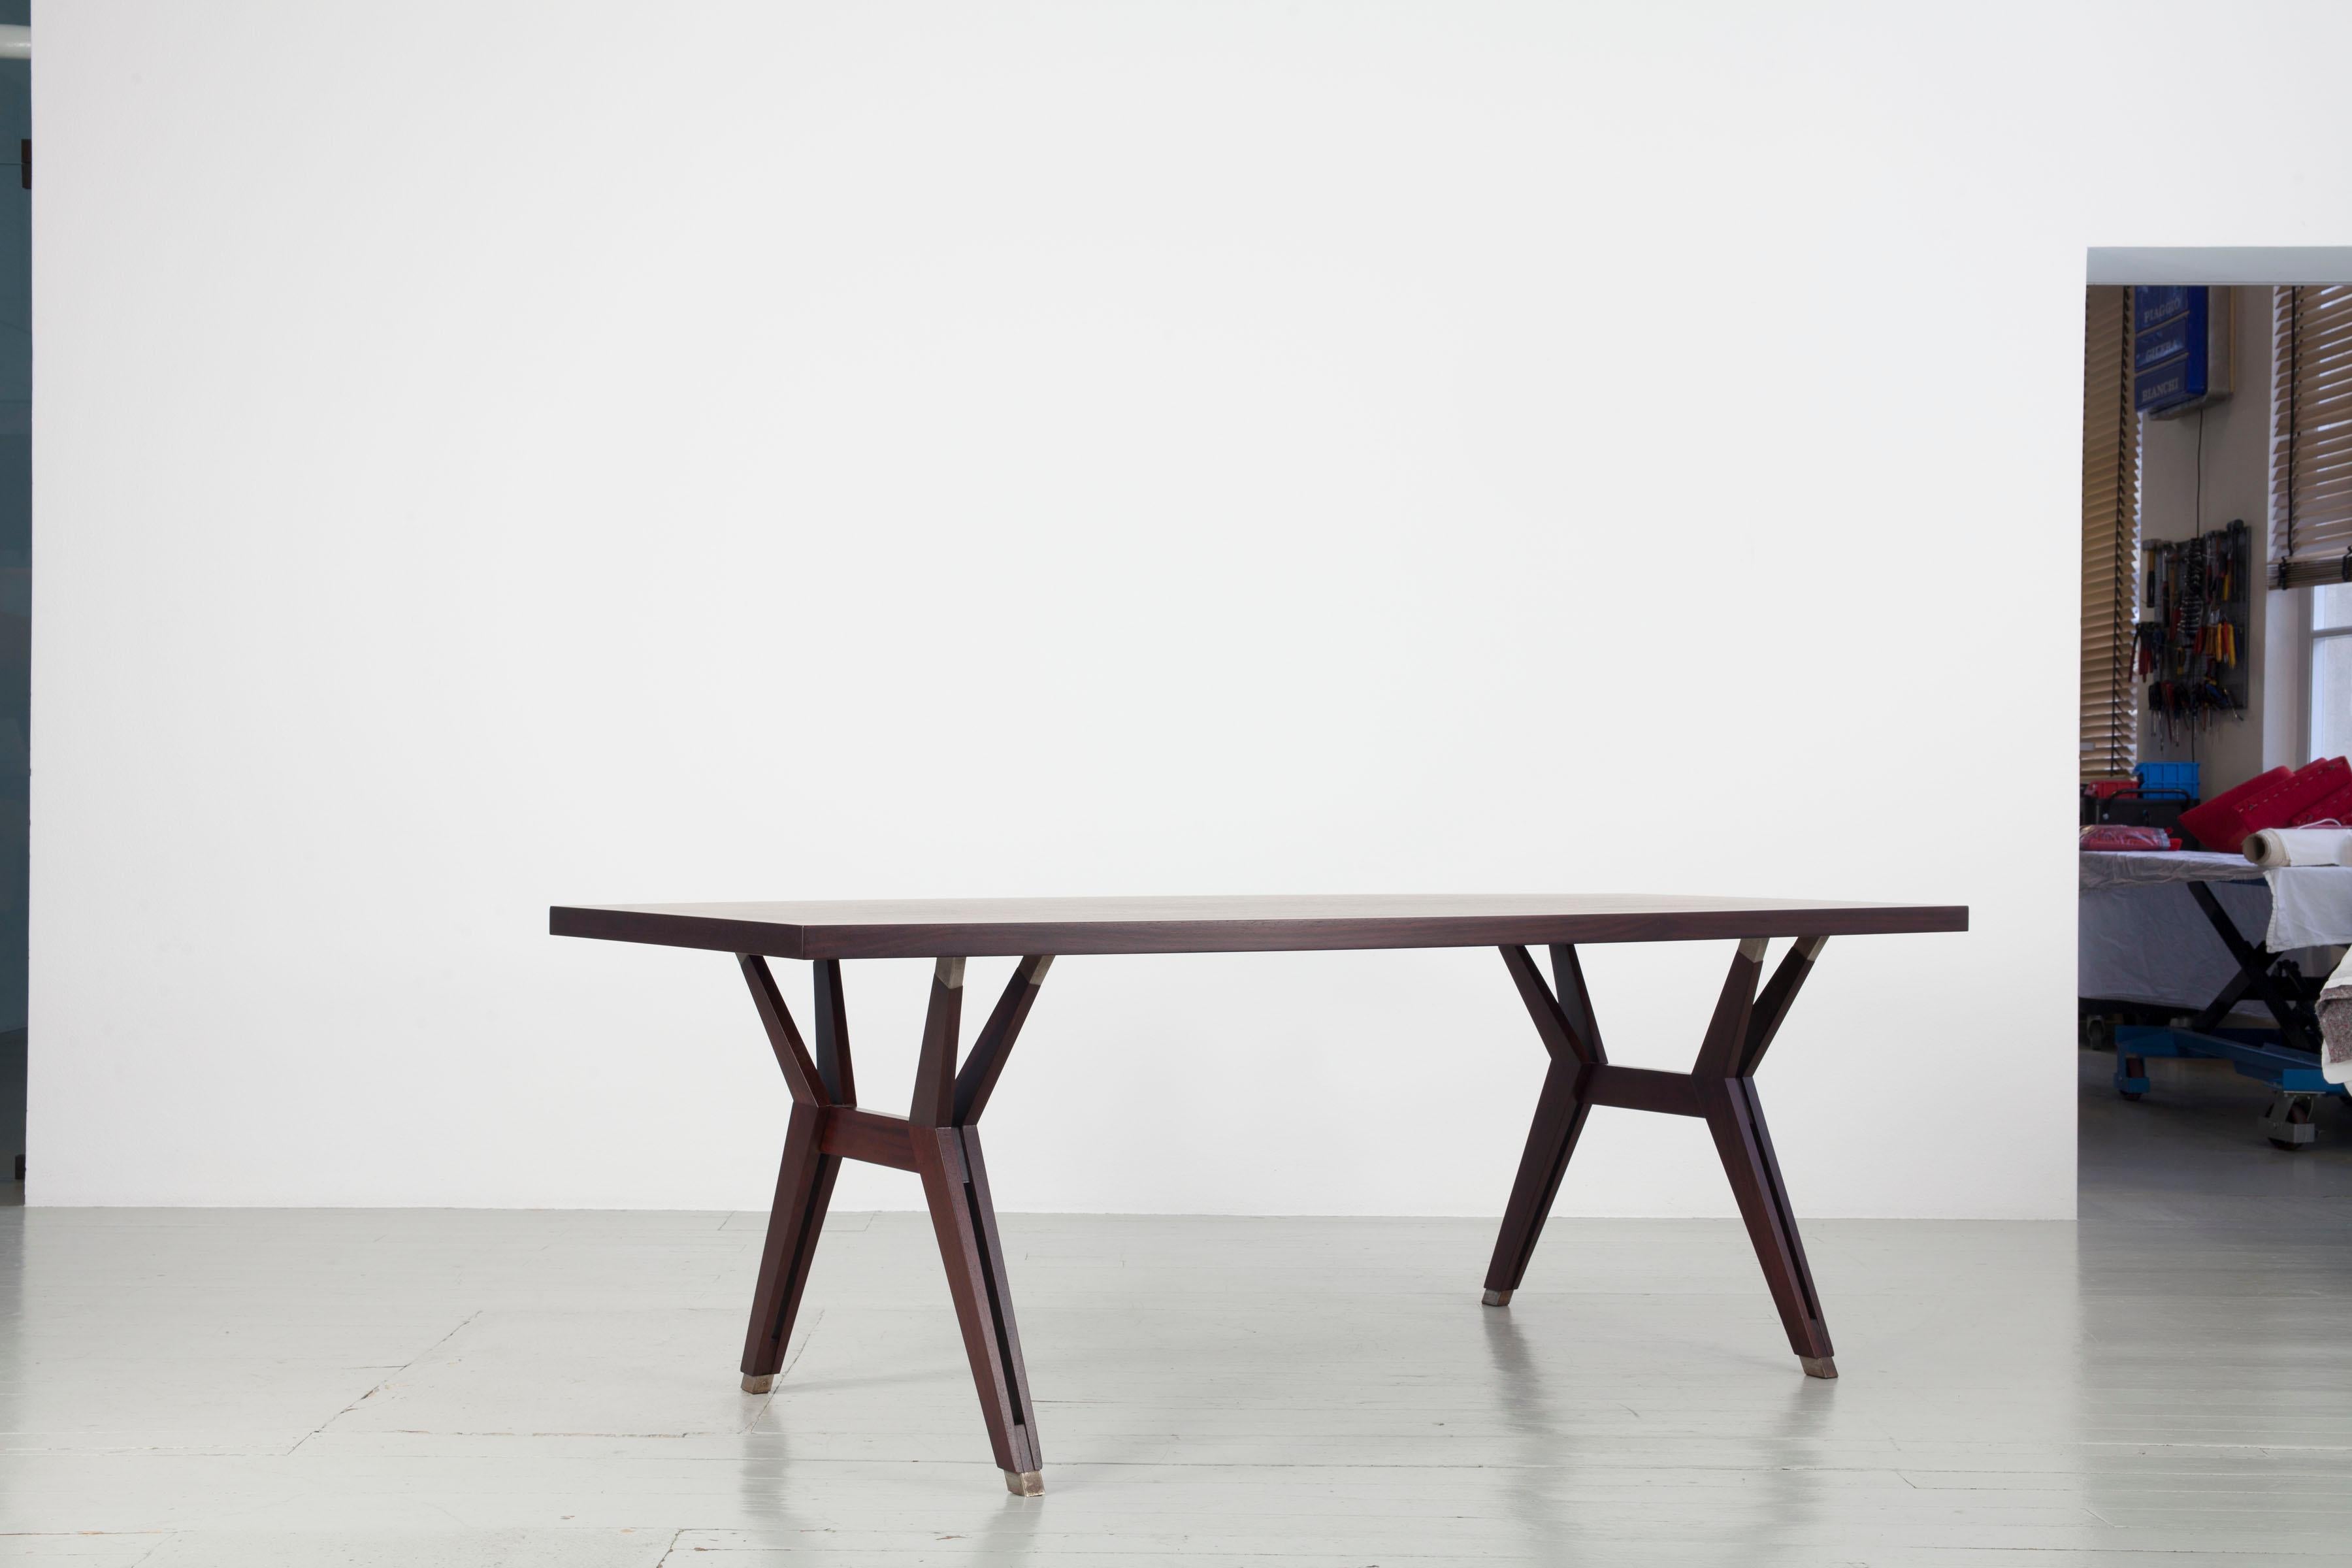 Dining Table - Design by Ennio Fazioli, Manufacturer: M.I.M. - Mobili Italiani Moderni, Italy, 1960s
Constructed of a rosewood veneer tabletop and mahogany table legs, this table was designed by Ennio Fazioli as a variation of a design by Ico